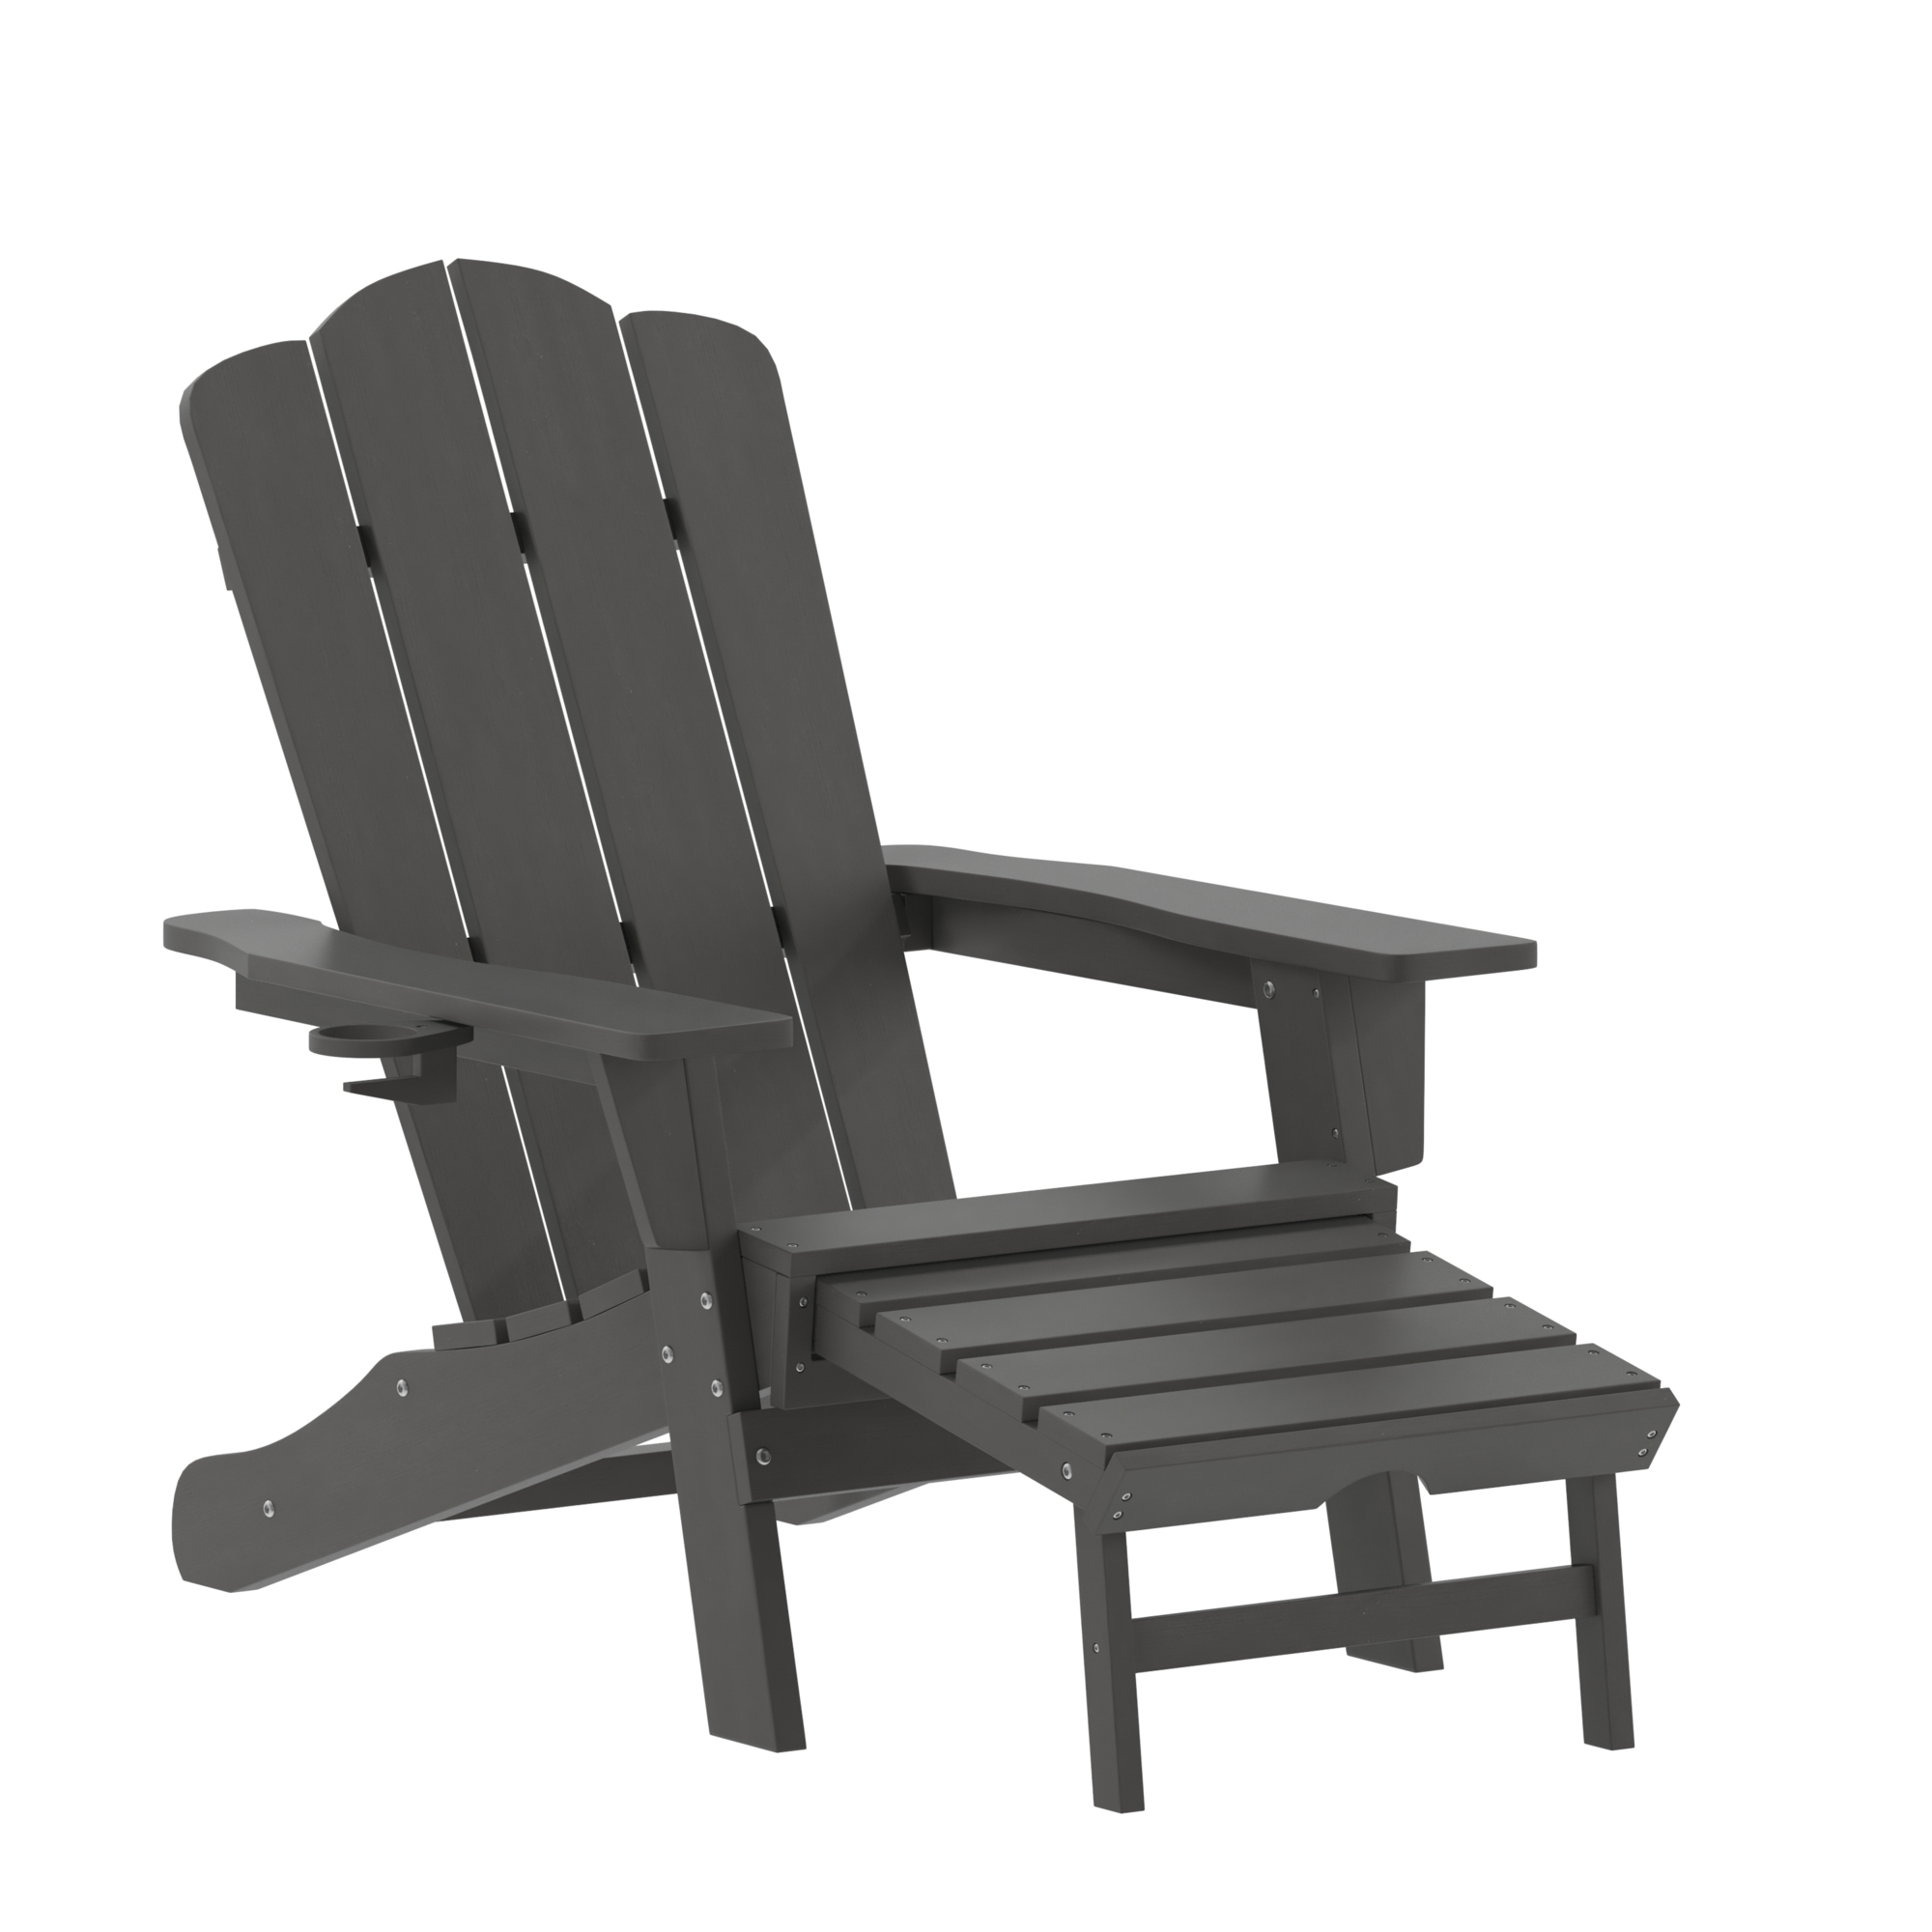 Flash Furniture, Gray Adirondack Chair with Ottoman and Cupholder, Primary Color Gray, Material HDPE, Width 33.75 in, Model LEHMP1044110GY